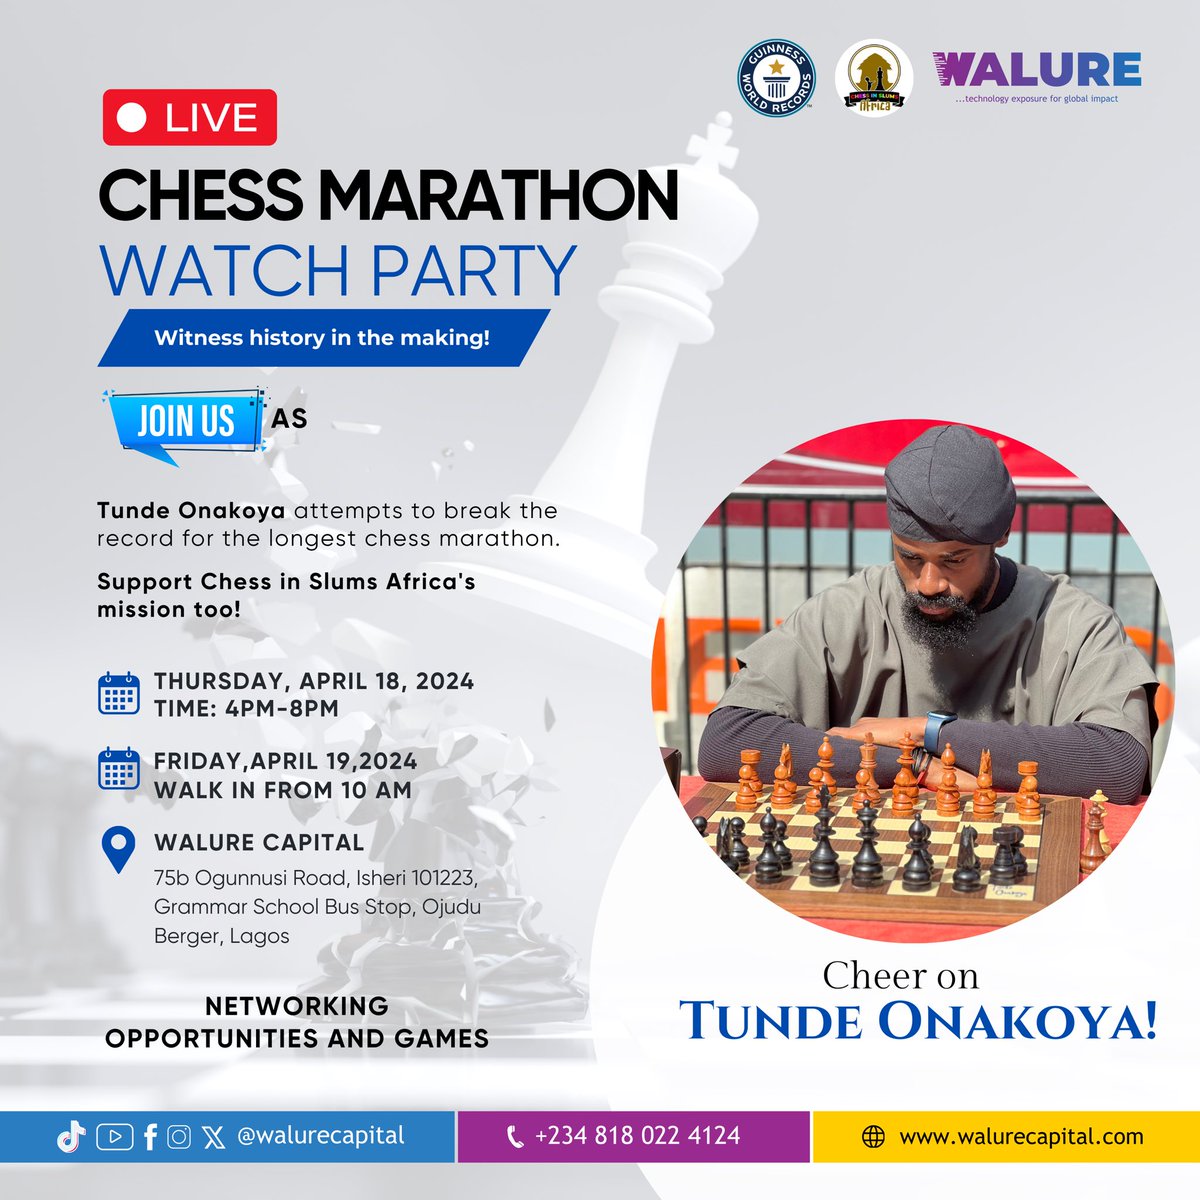 Come witness history live at the Chess Marathon Watch Party where Tunde Onakoya is set to break the world record for the longest chess marathon. 

Venue is Walure Capital building.
#walurecapital 
#walurehub
#chessmarathonforchange 
#chessinslums 
#chess